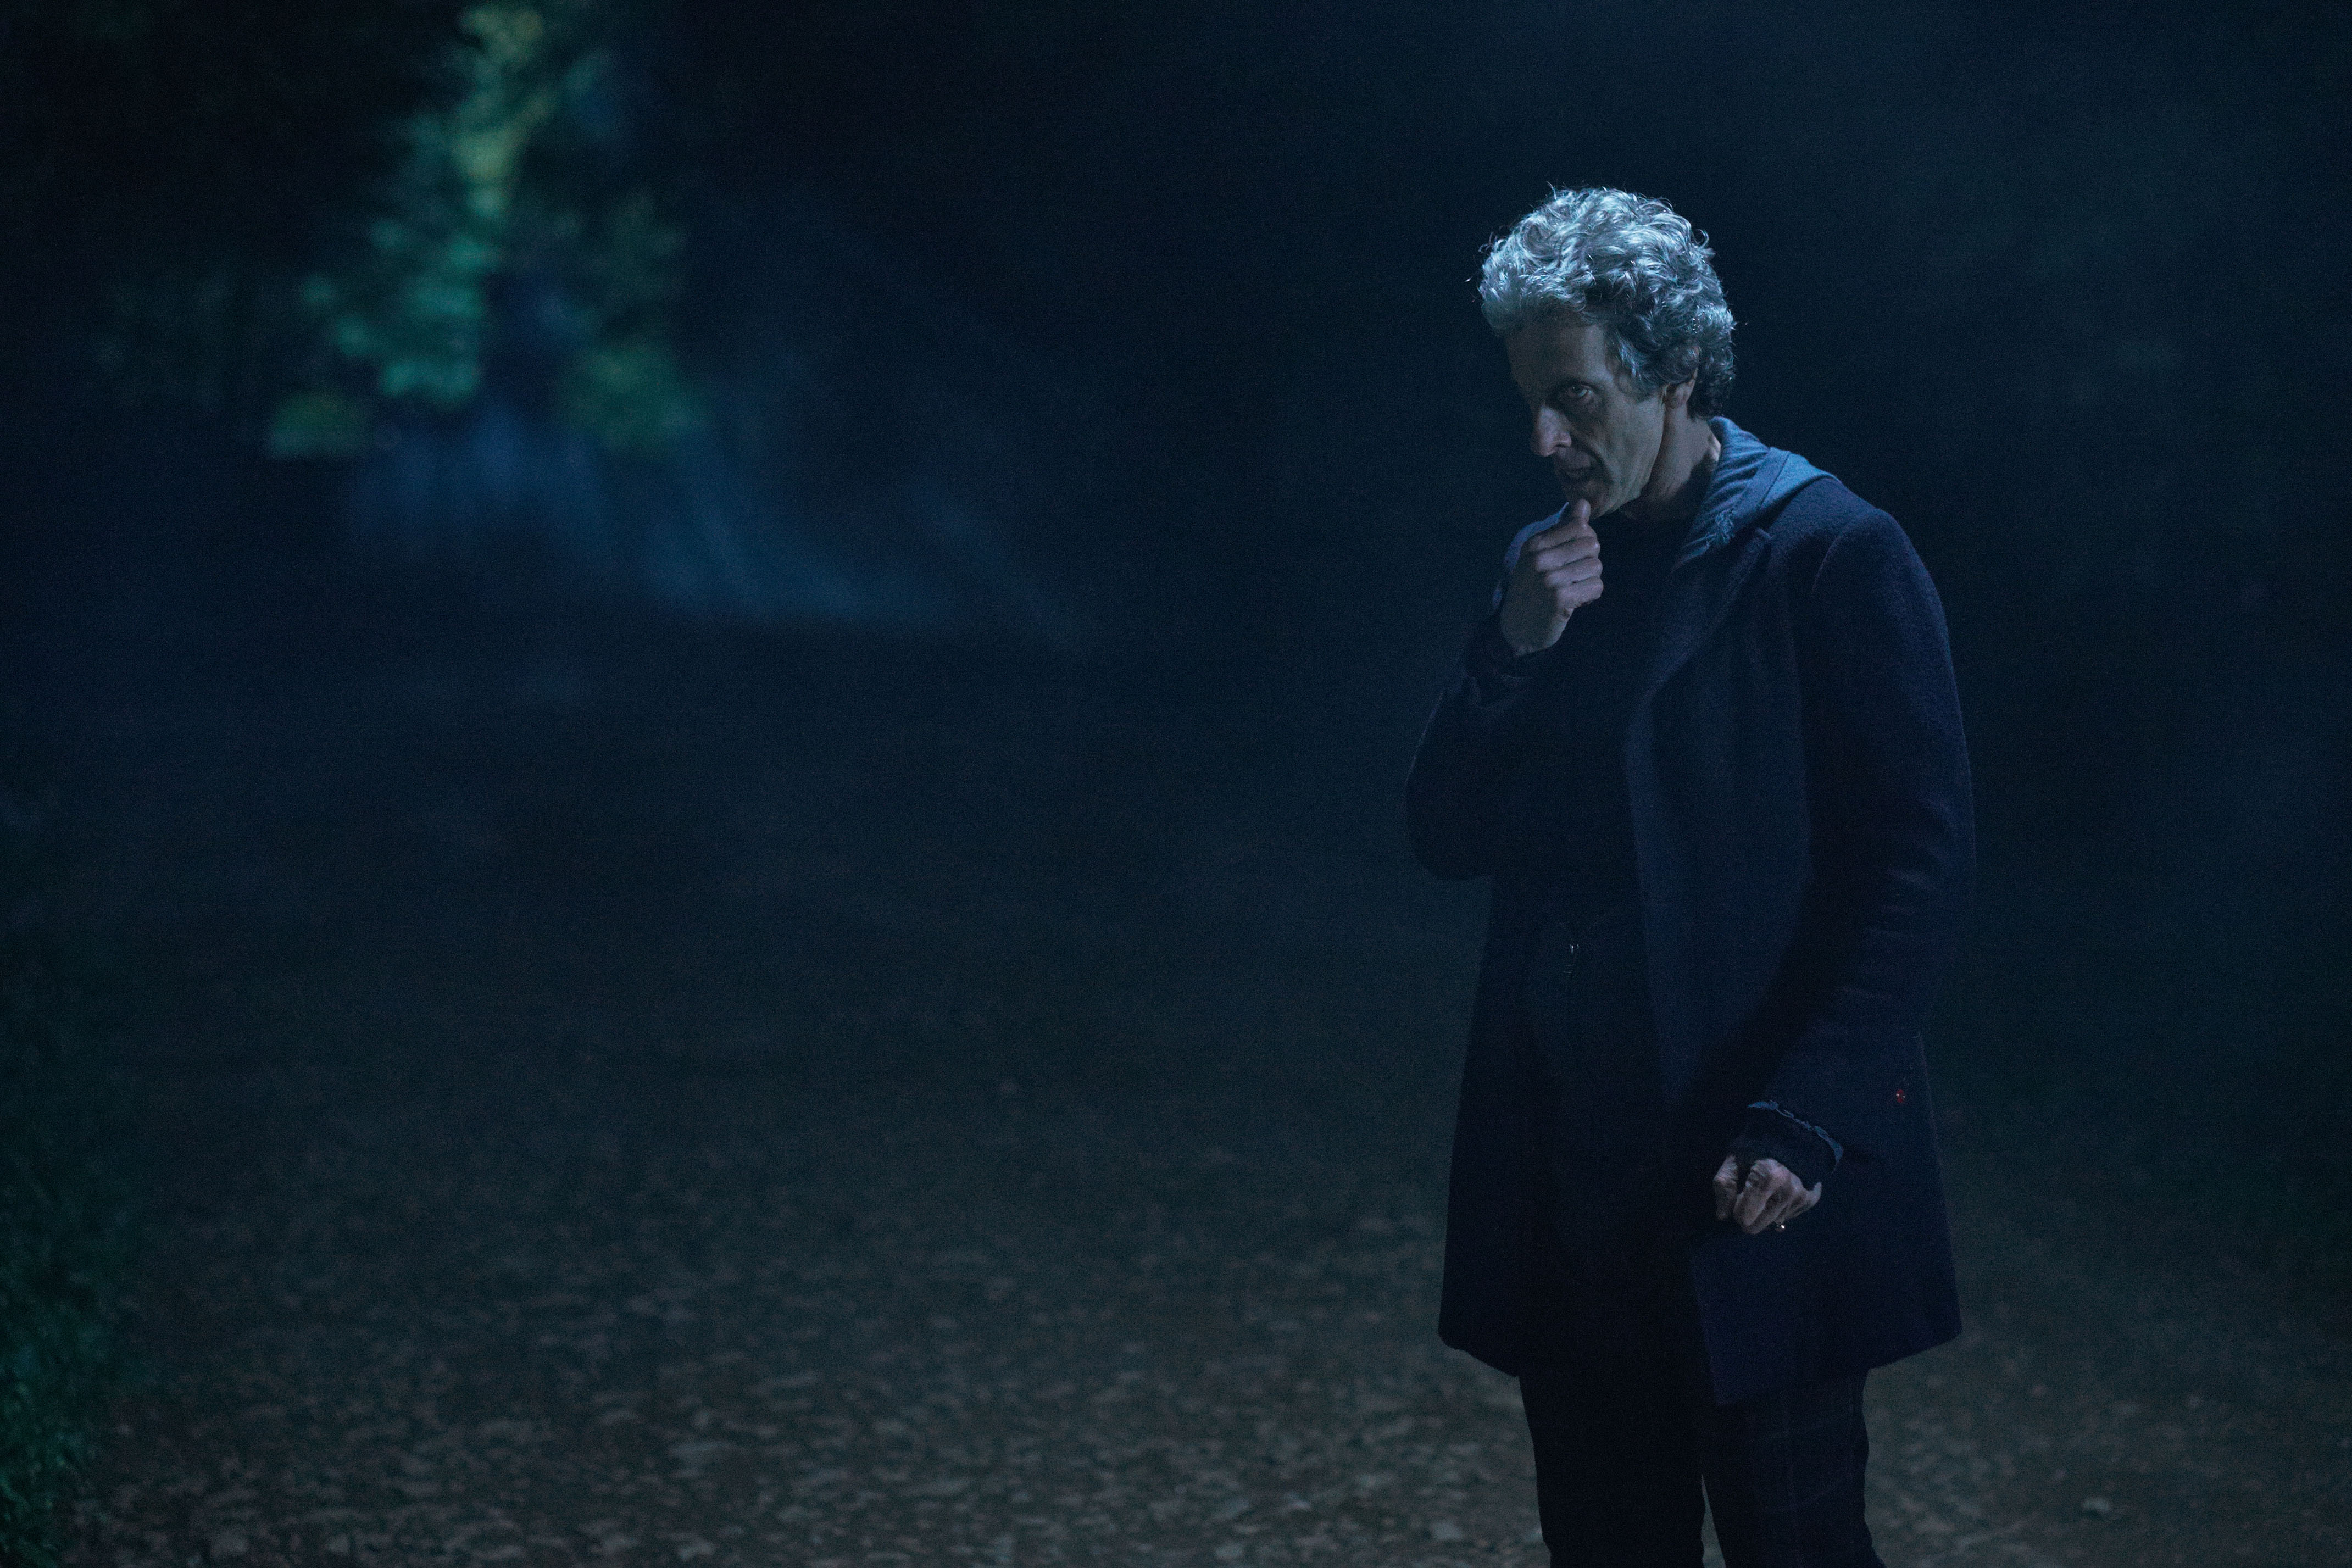 Doctor Who Peter Capaldi As 12Th Doctor Wallpapers